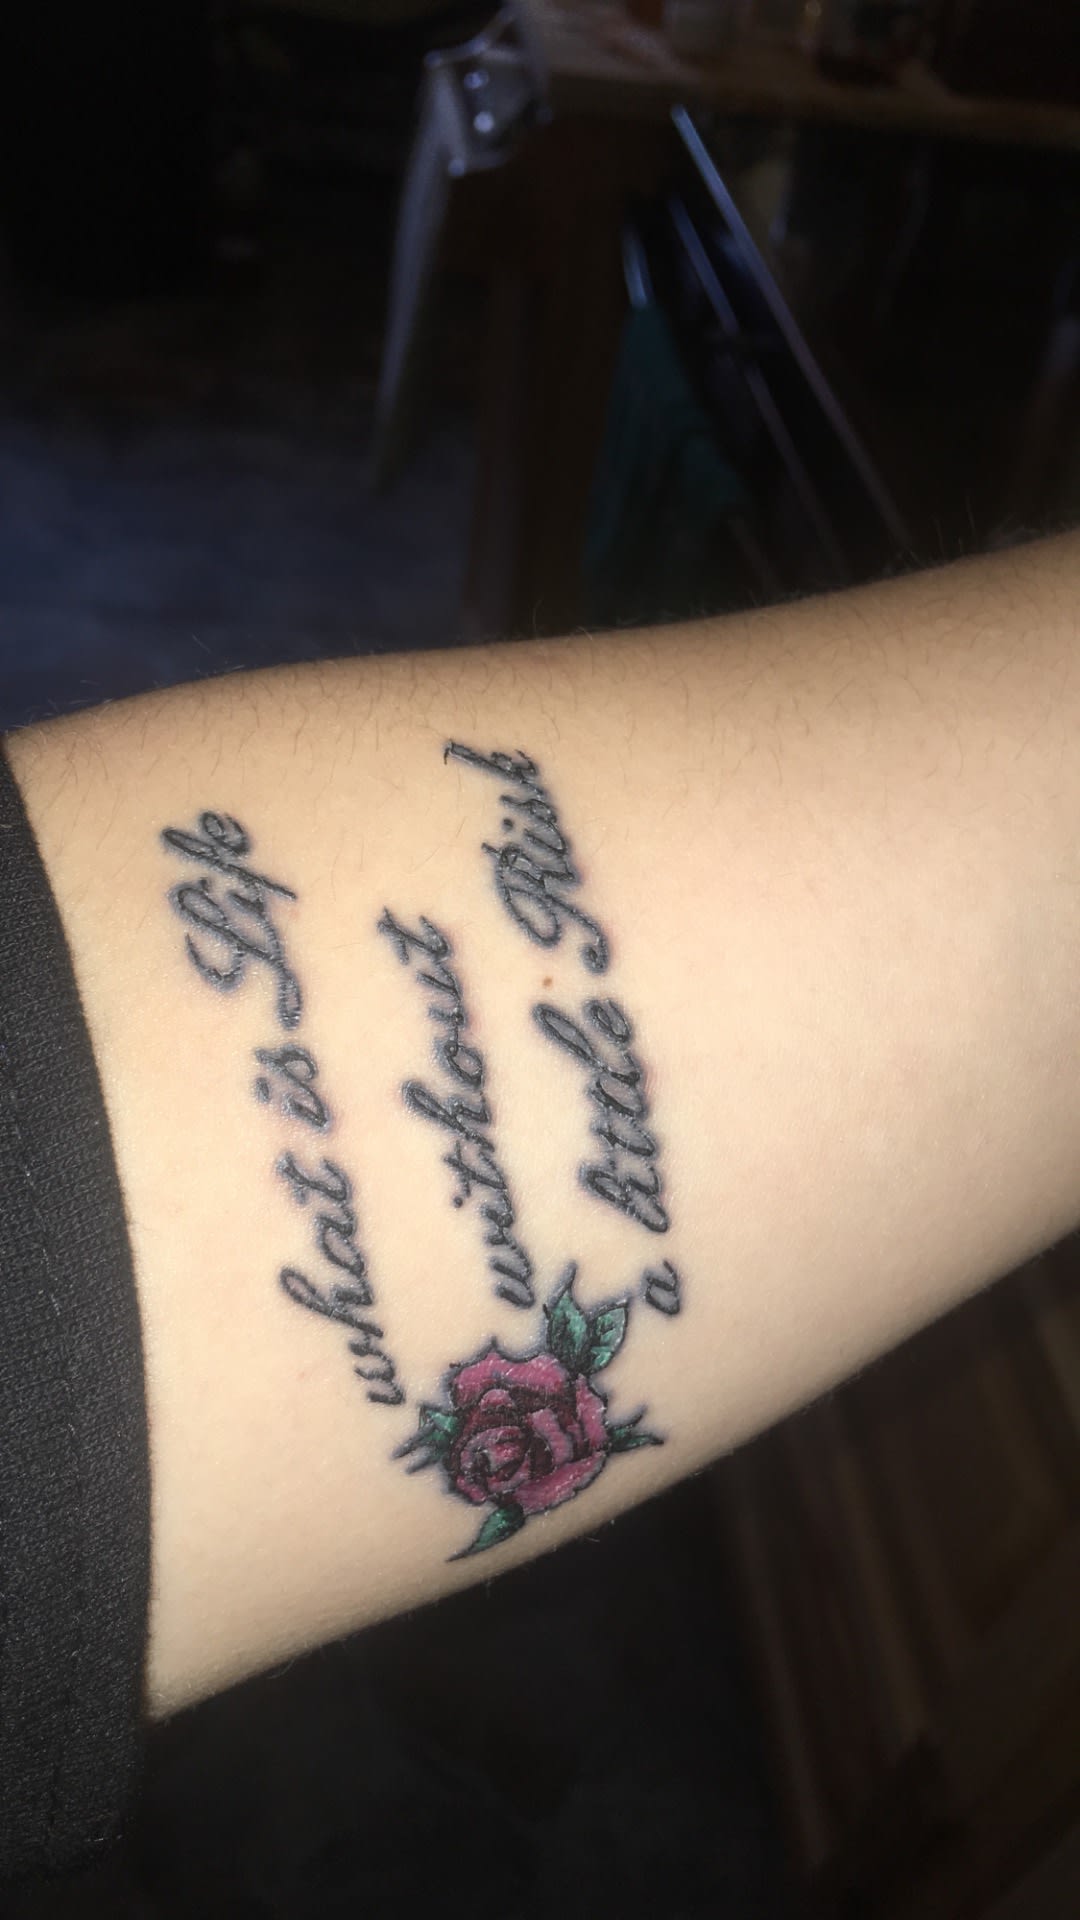 New tattoo So happy how it came out This song has done so much for me  Through weight loss and a toxic relationship it means so much   rblueoctober